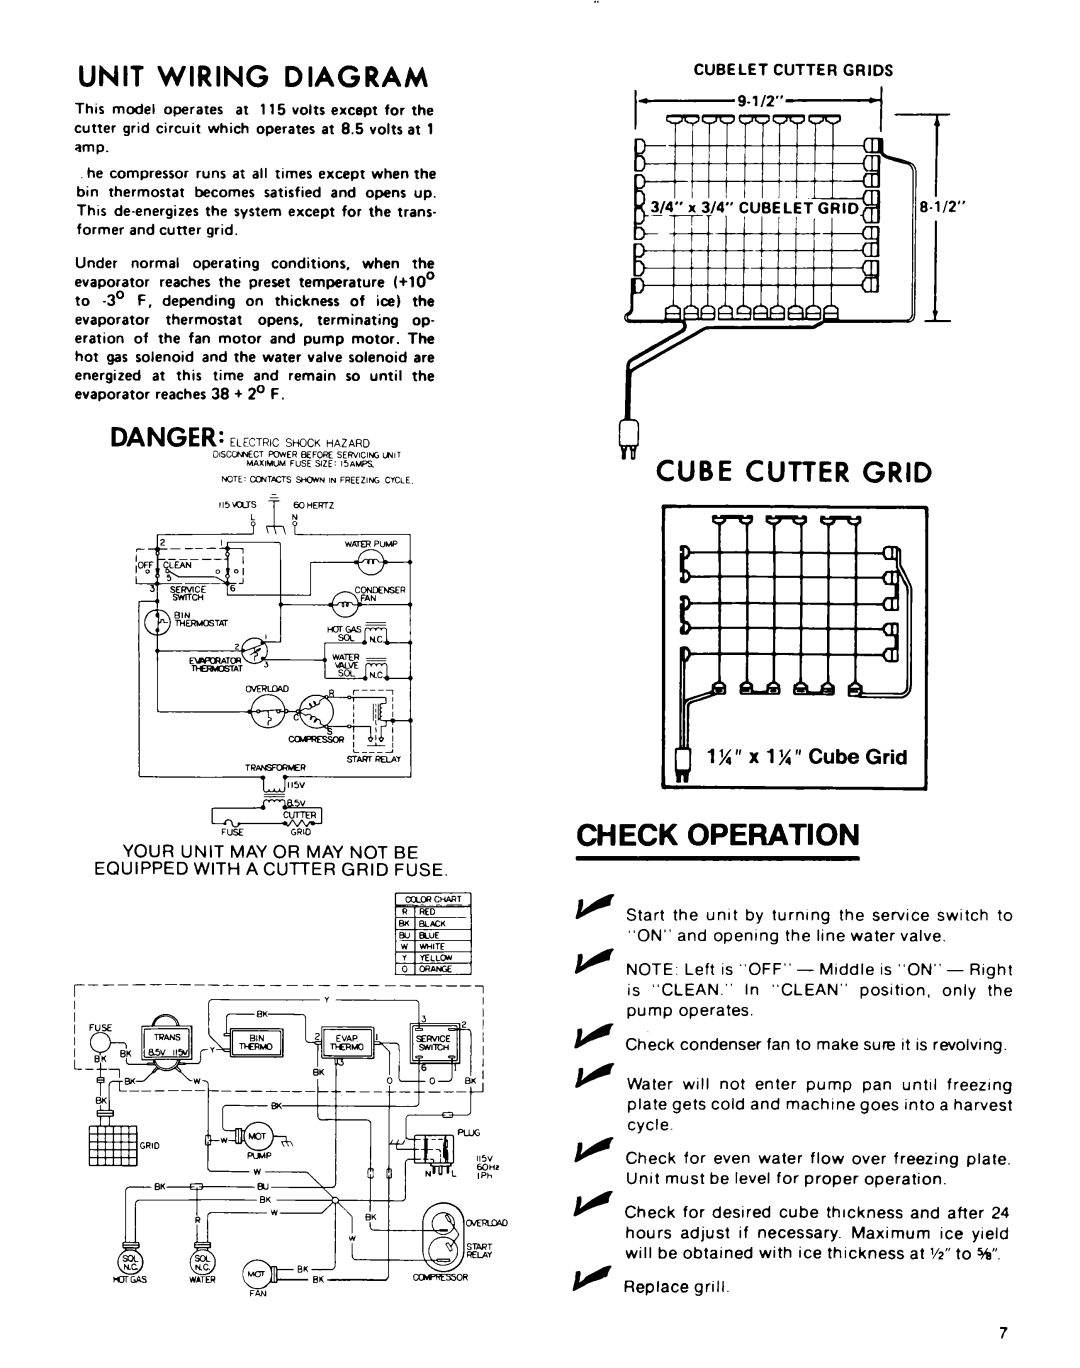 Whirlpool 50 manual Check Operation, Unit Wiring Diagram, Cube Cutter Grid, 1%” x 1%” Cube Grid ” 